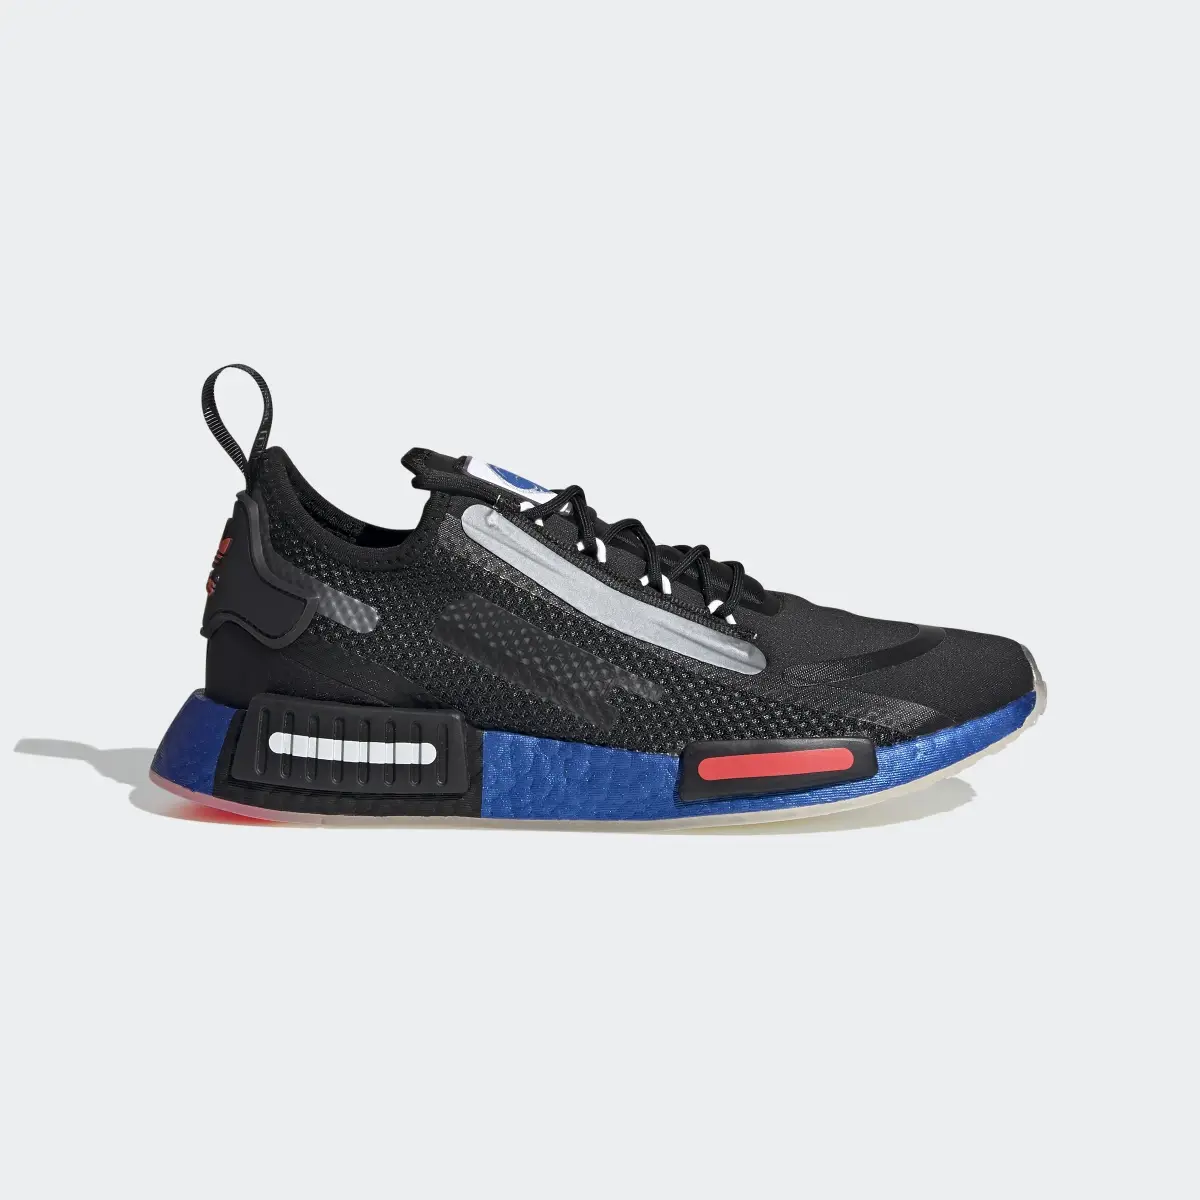 Adidas NMD_R1 Spectoo Shoes. 2